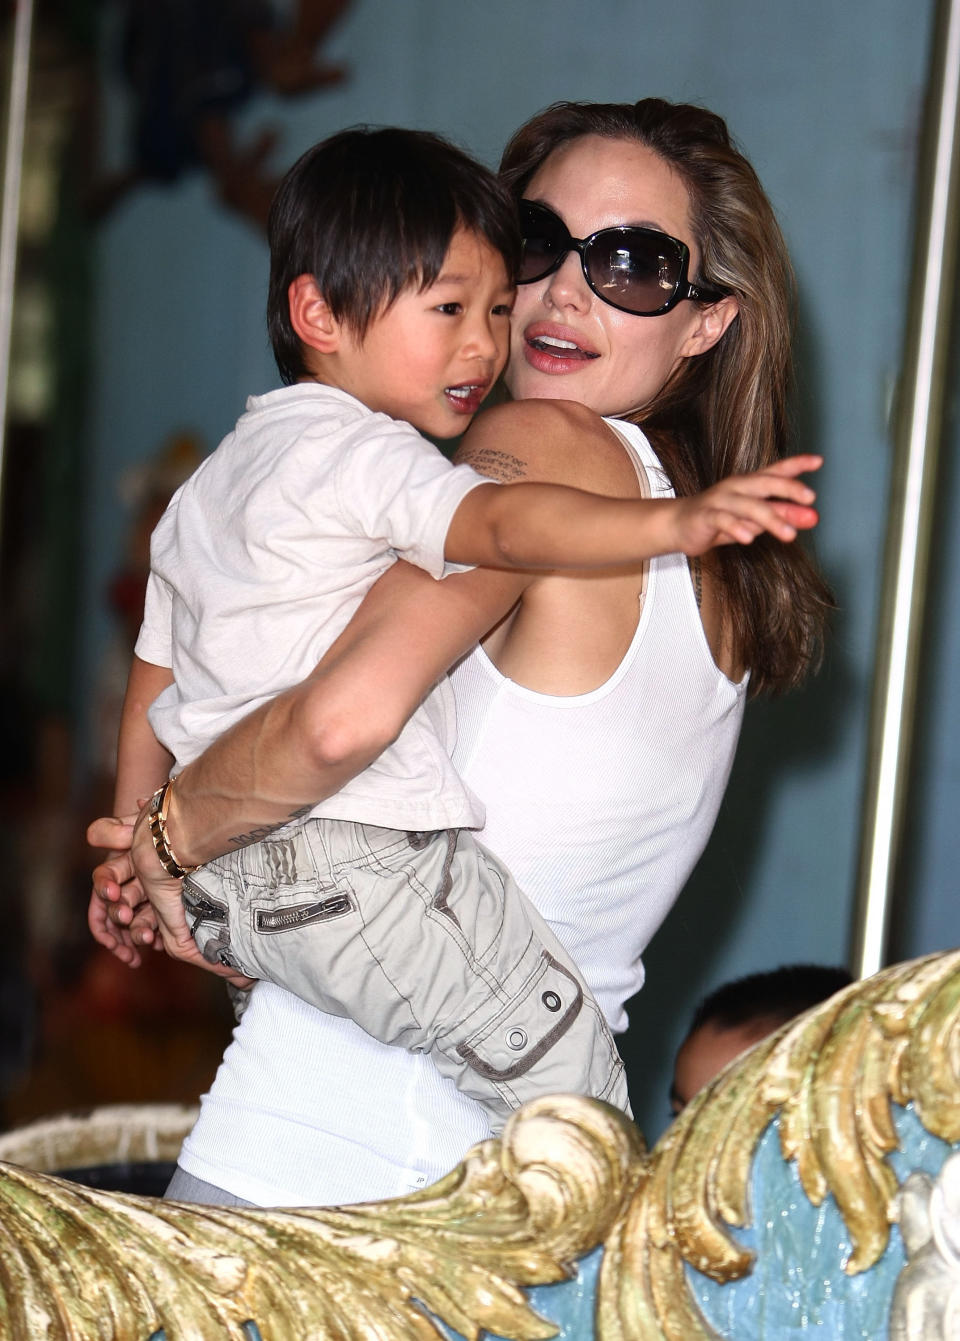 In 2007, Angelina adopts Pax from Vietnam, where he was abandoned as a baby.   Angelina adopts Pax as a single parent as Vietnam laws state unmarried couples cannot adopt children. 